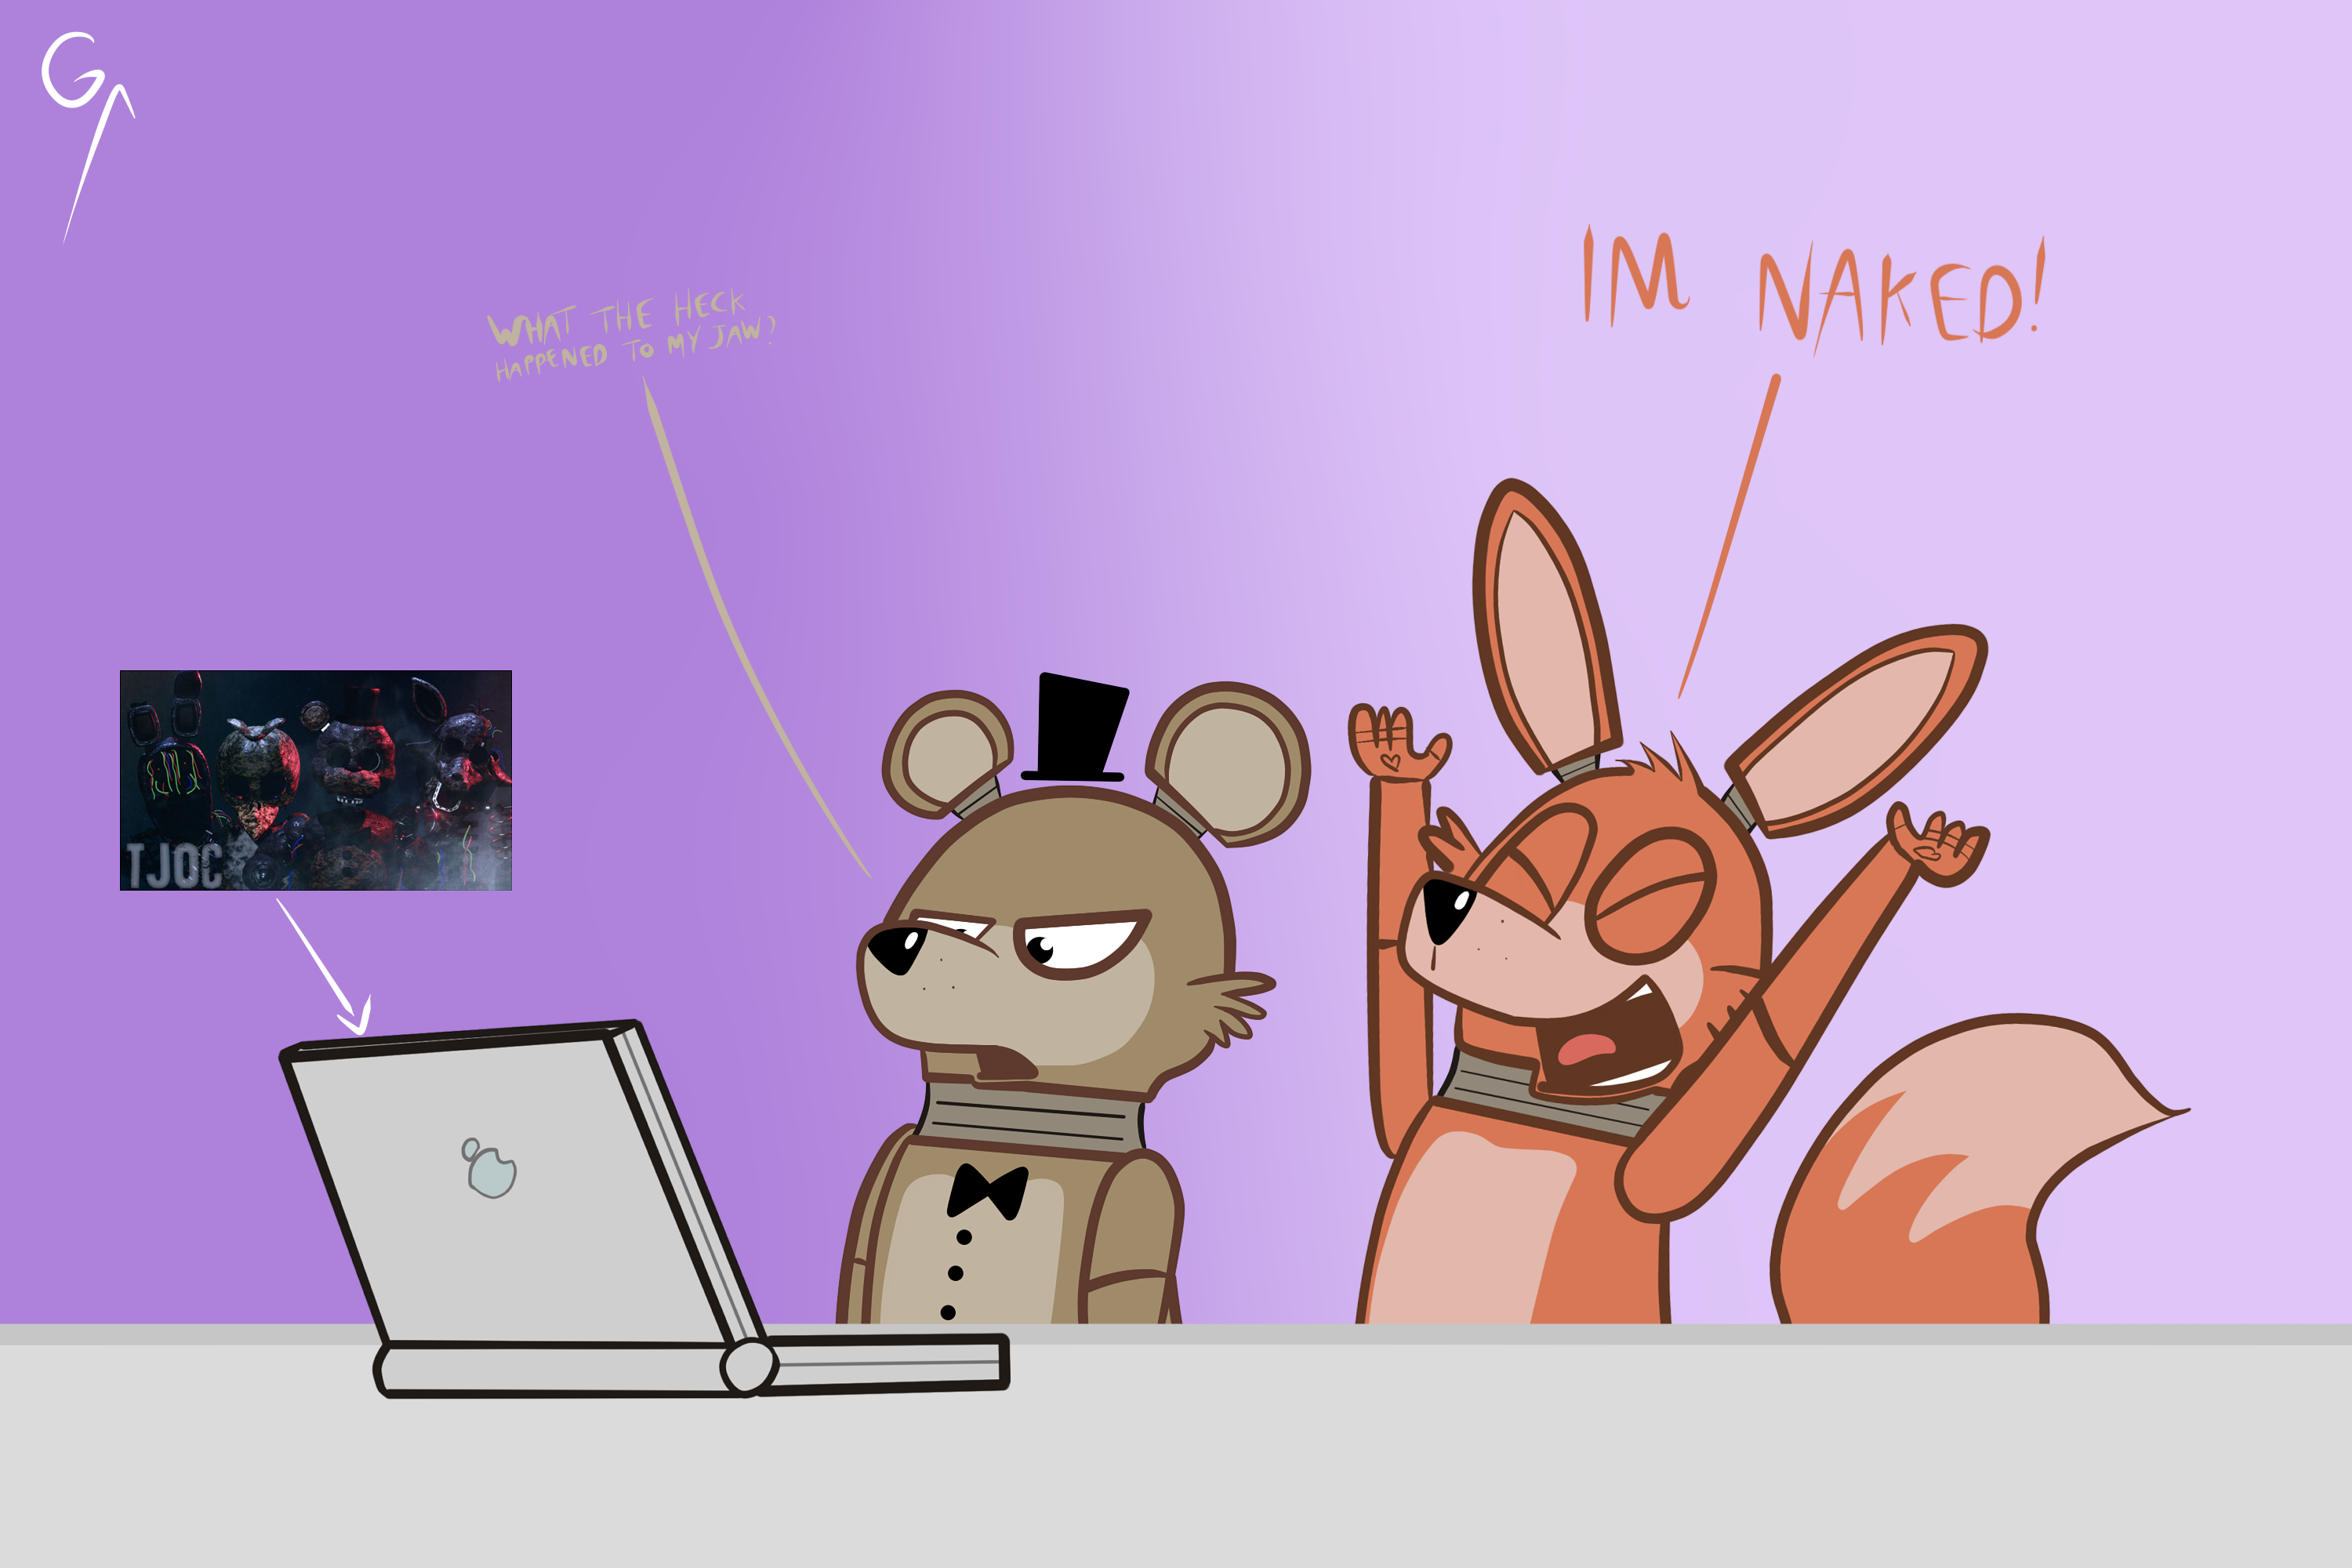 They will know the Joy of Creation : r/fivenightsatfreddys